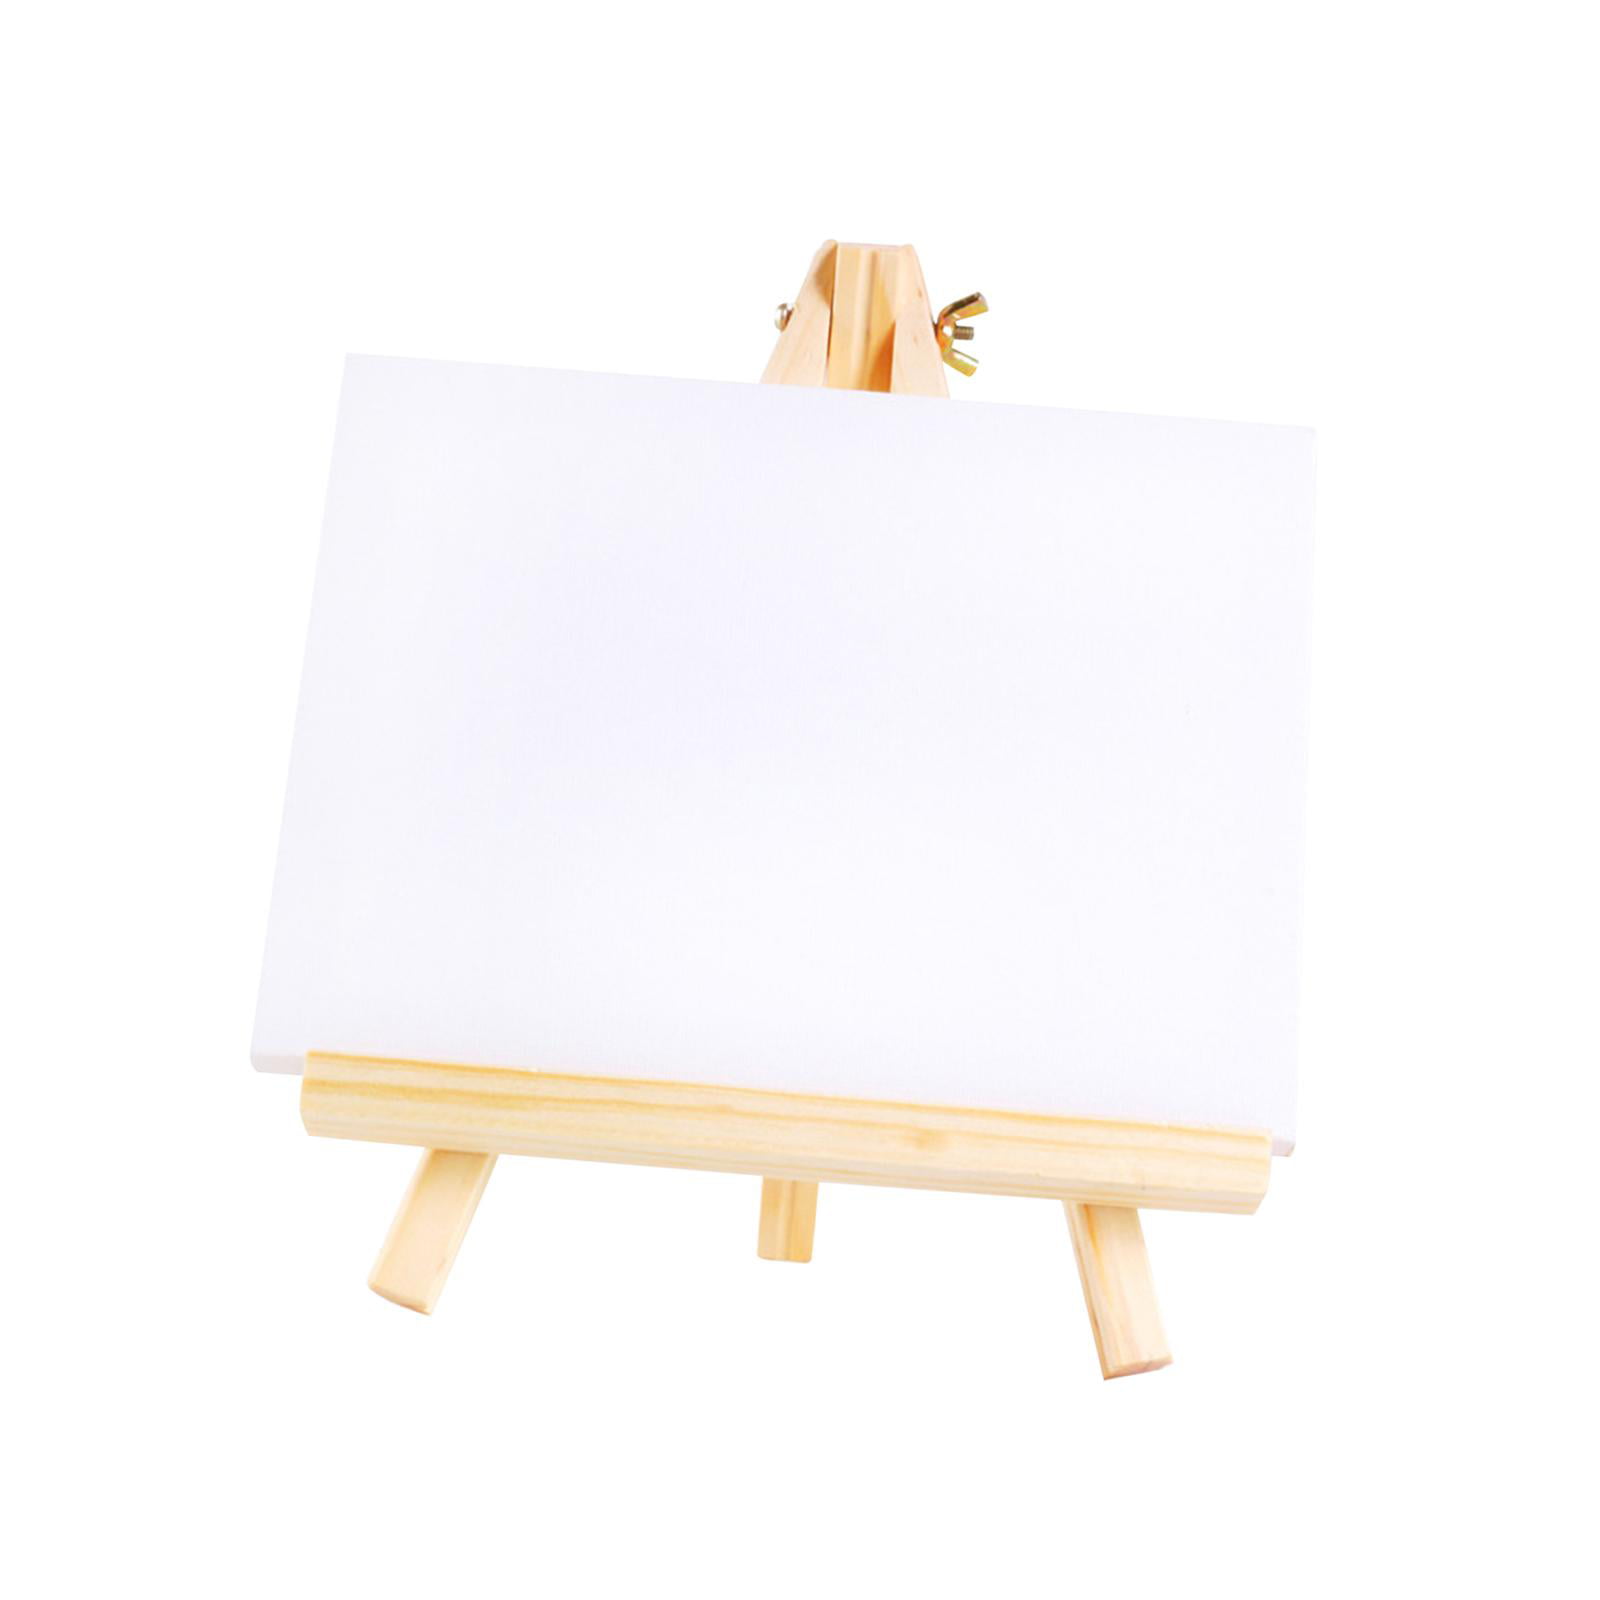 Natural Wood Mini Bamboo Easel Frame Display Meeting Wedding Table Number  Name Card Stand Display Holder F20174034 From Lindsay_sz, $3.8